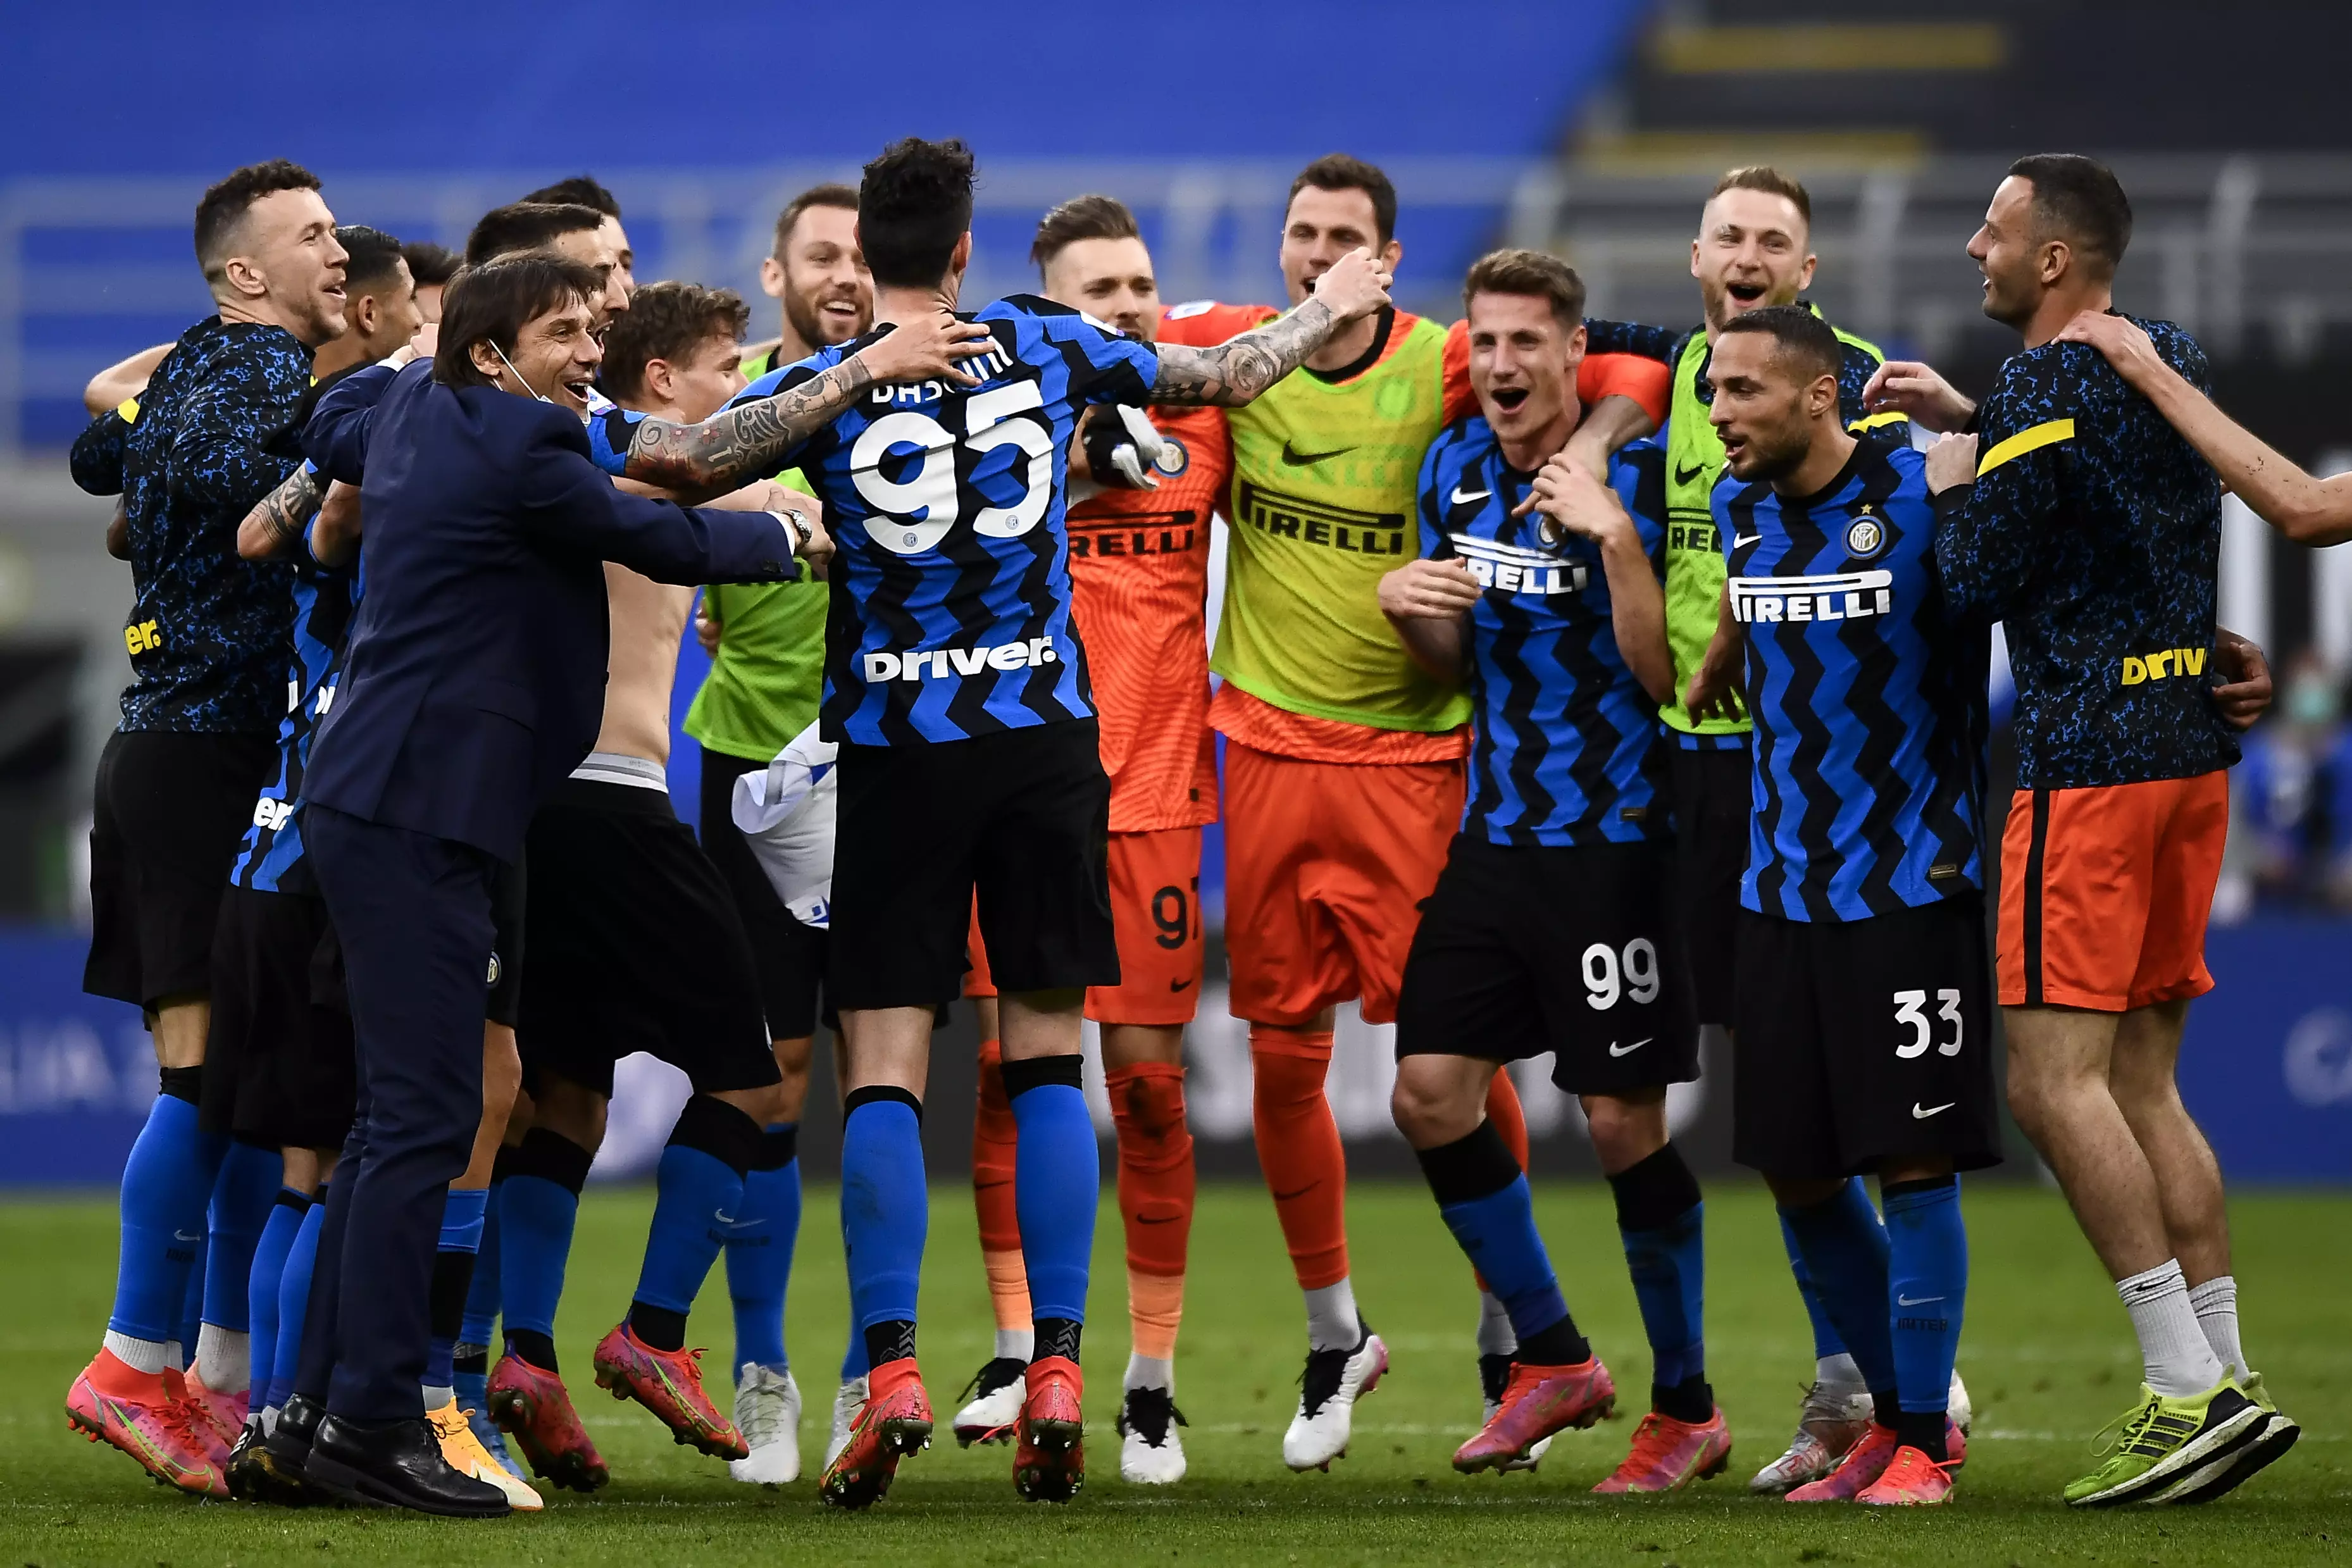 Conte celebrates with his players, having been crowned champions of Italy. Image: PA Images